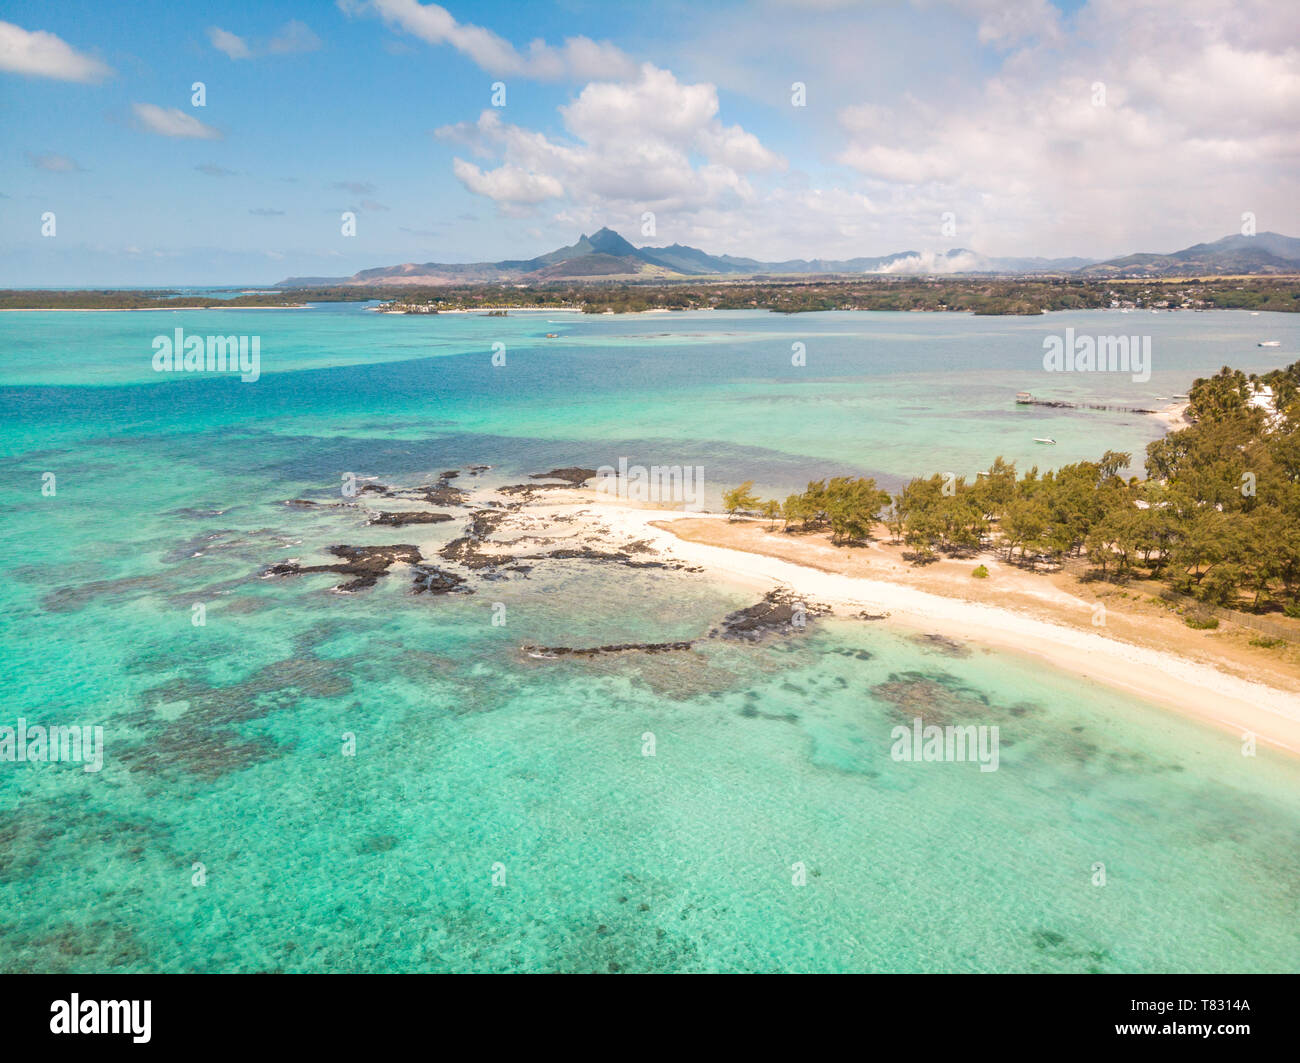 Aerial view of beautiful tropical beach with turquoise sea. Tropical vacation paradise destination of D'eau Douce and Ile aux Cerfs Mauritius Stock Photo